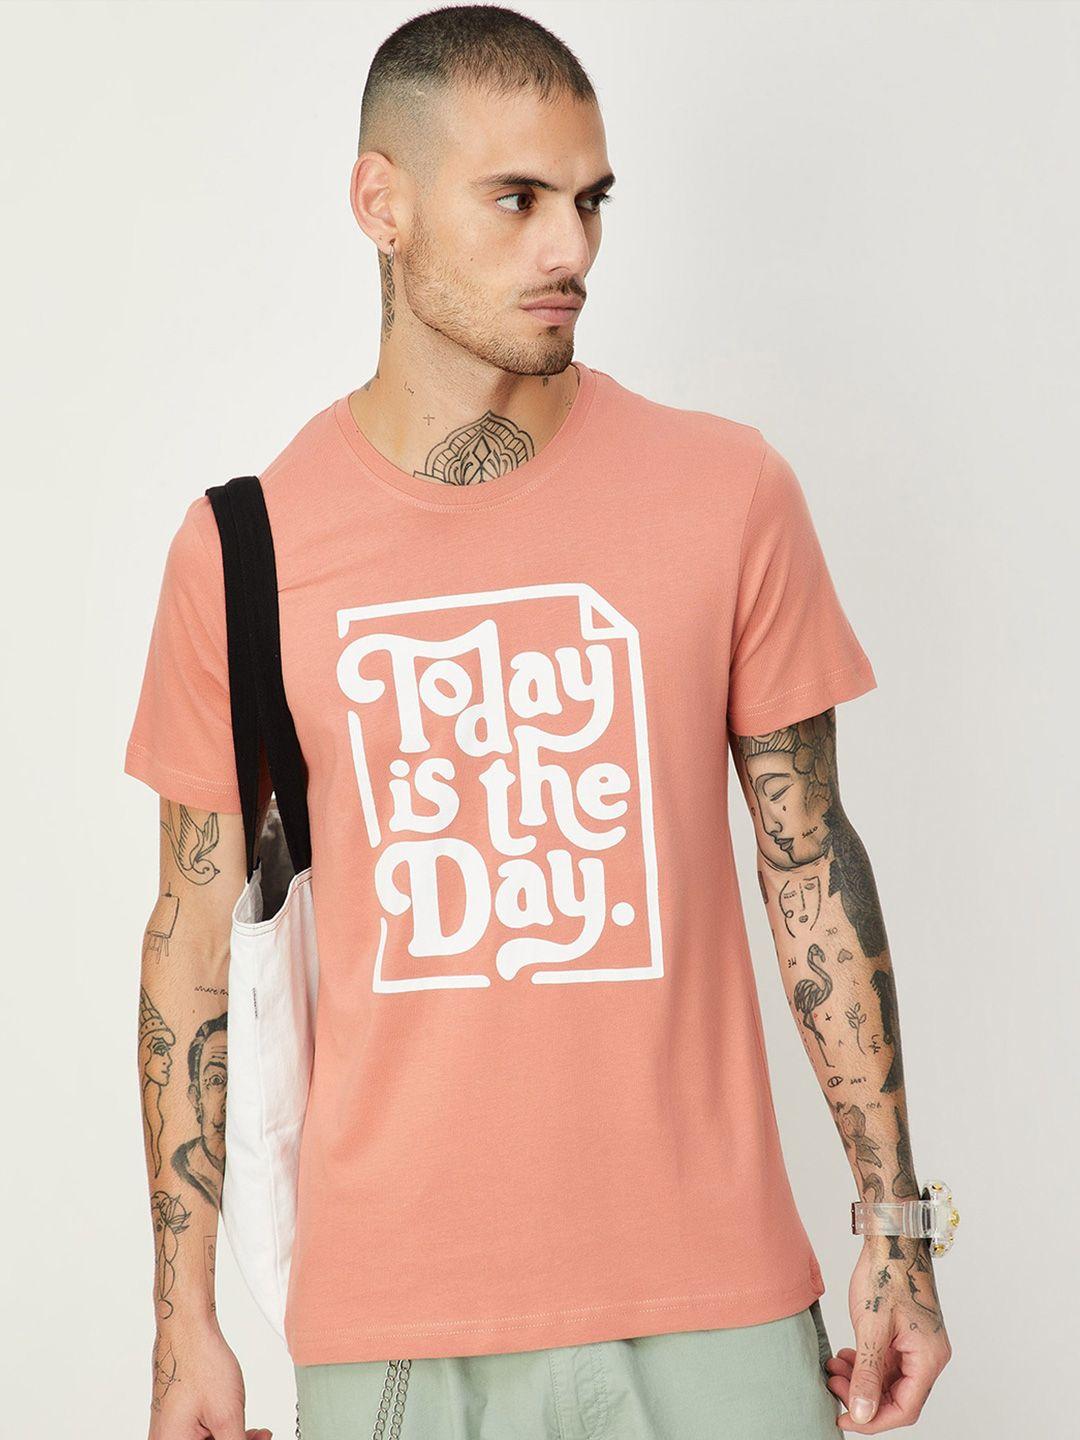 max-typography-printed-cotton-t-shirt